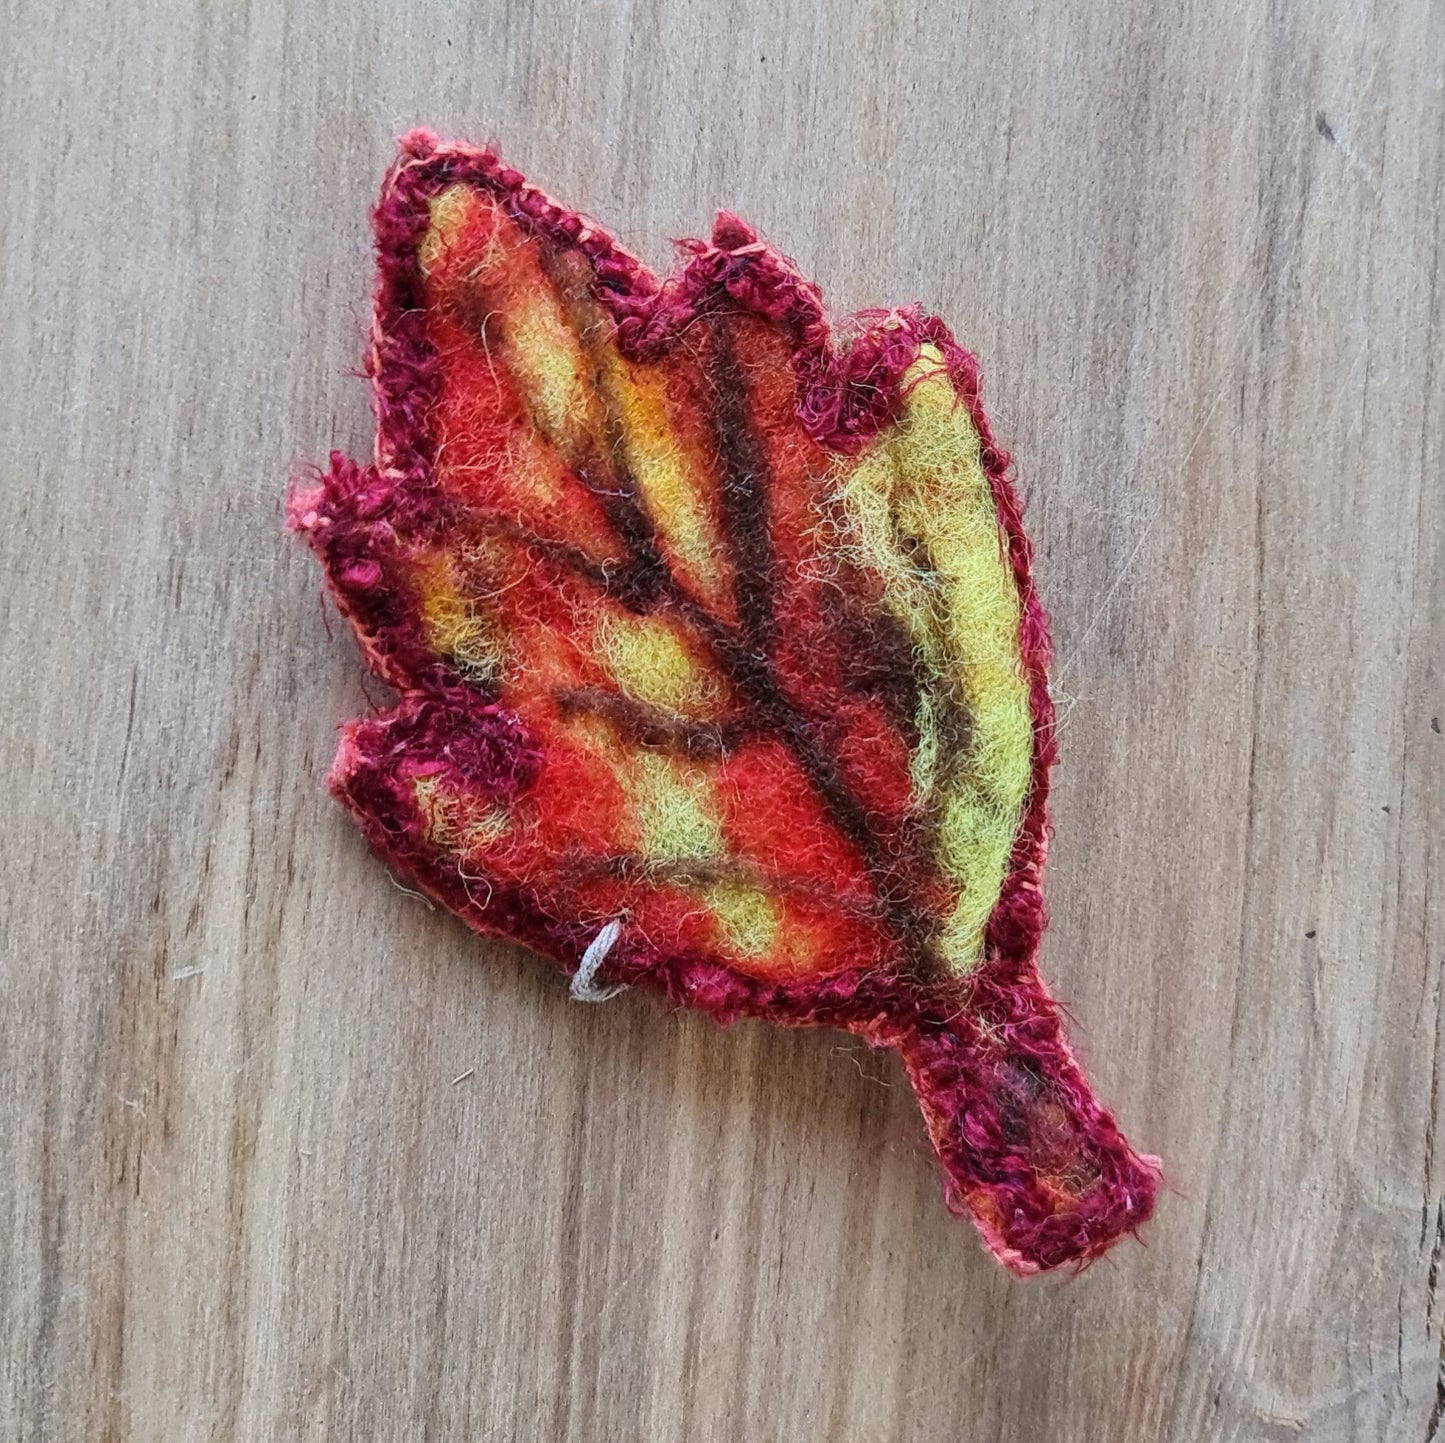 Felt brooch in the shape of a leaf / autumn colors 12.5 x 7 cm (AMA)